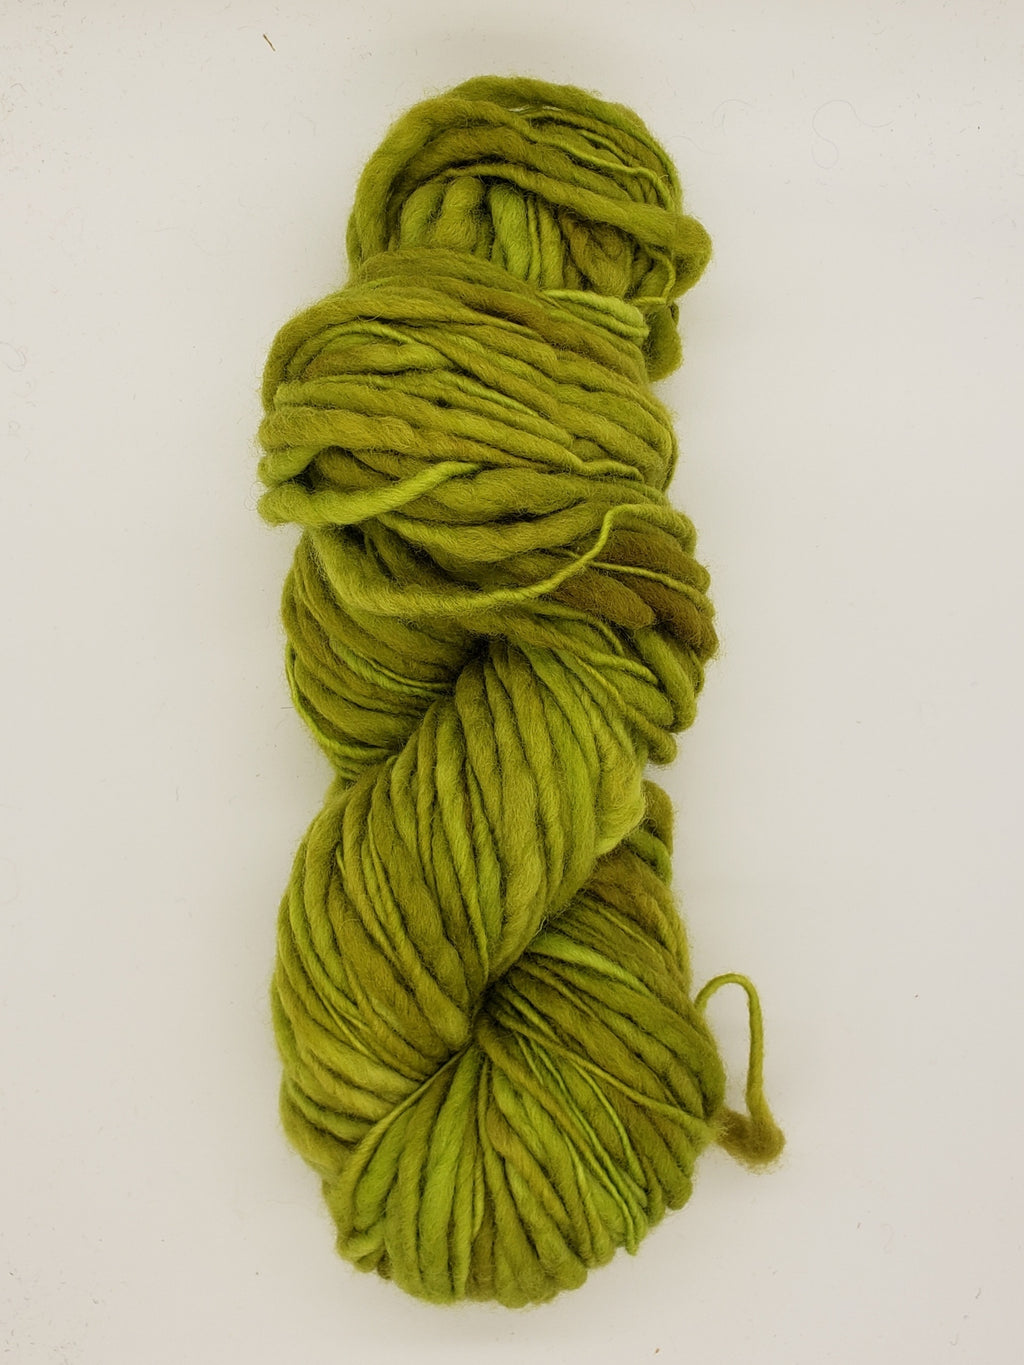 Slubby - MOSS - Merino/Blue Face Leicester - Hand Dyed Textured Yarn Thick and Thin  - Shades of Green